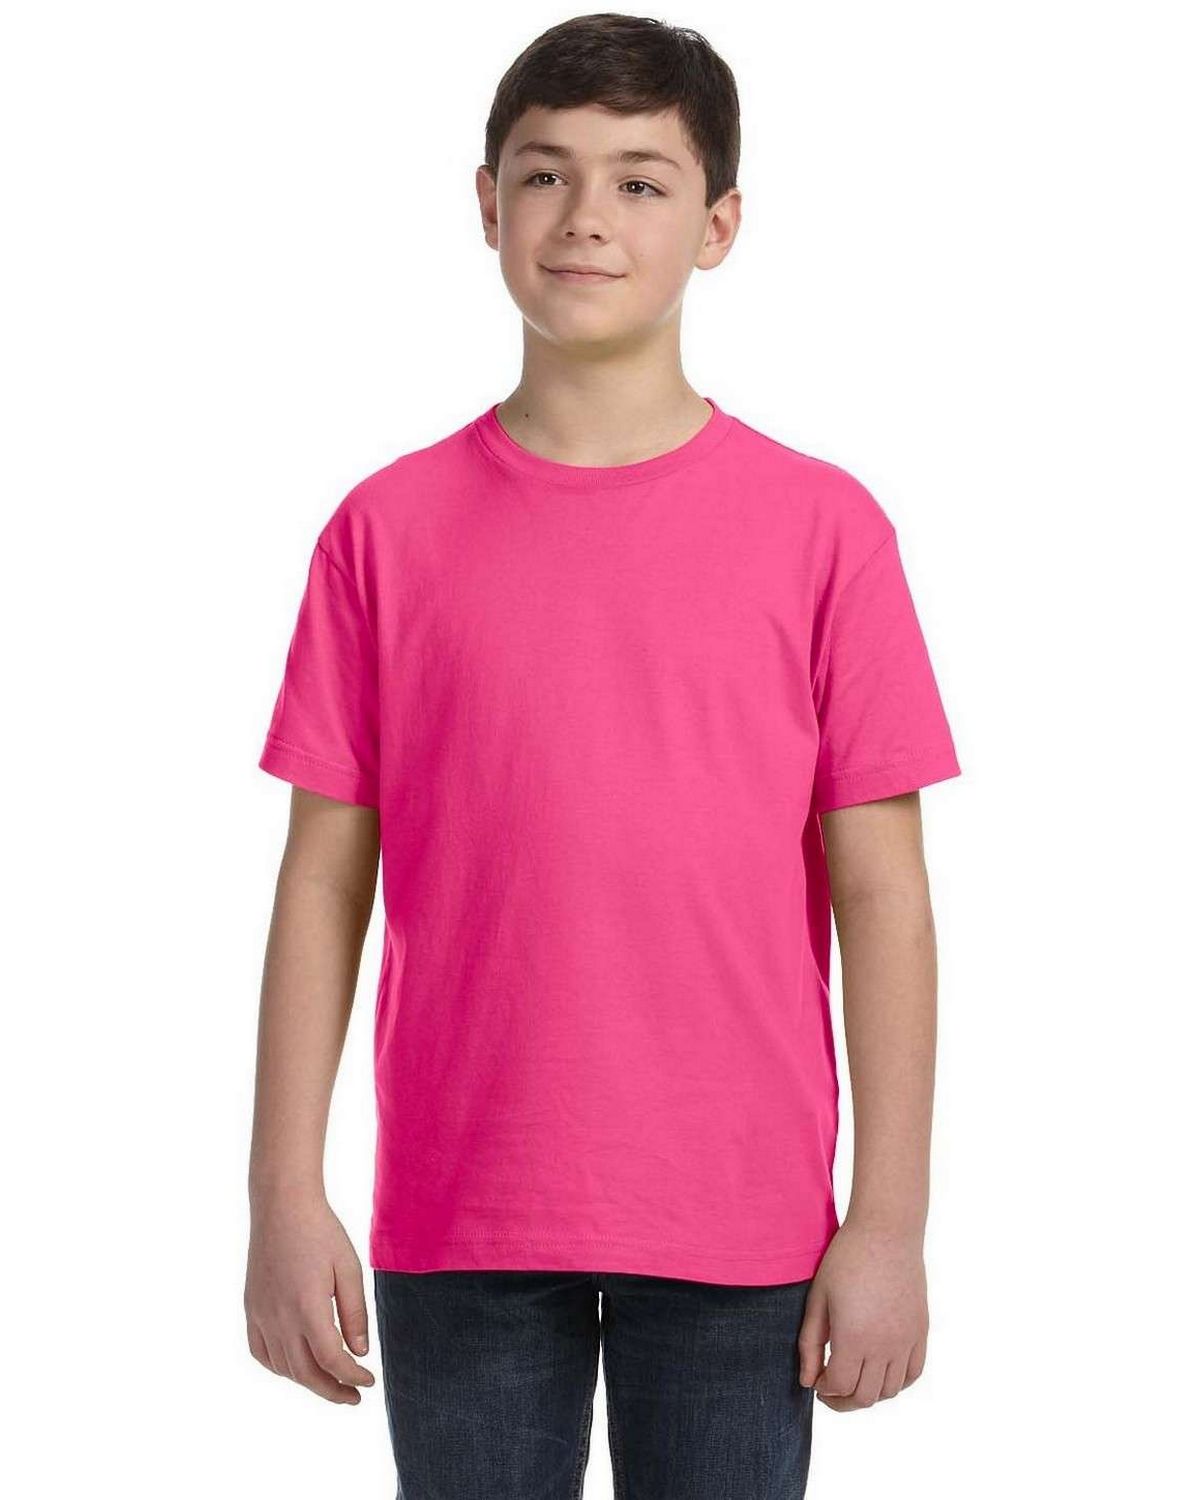 LAT 6101 Youth Fine Jersey T-Shirt - Shop at ApparelnBags.com